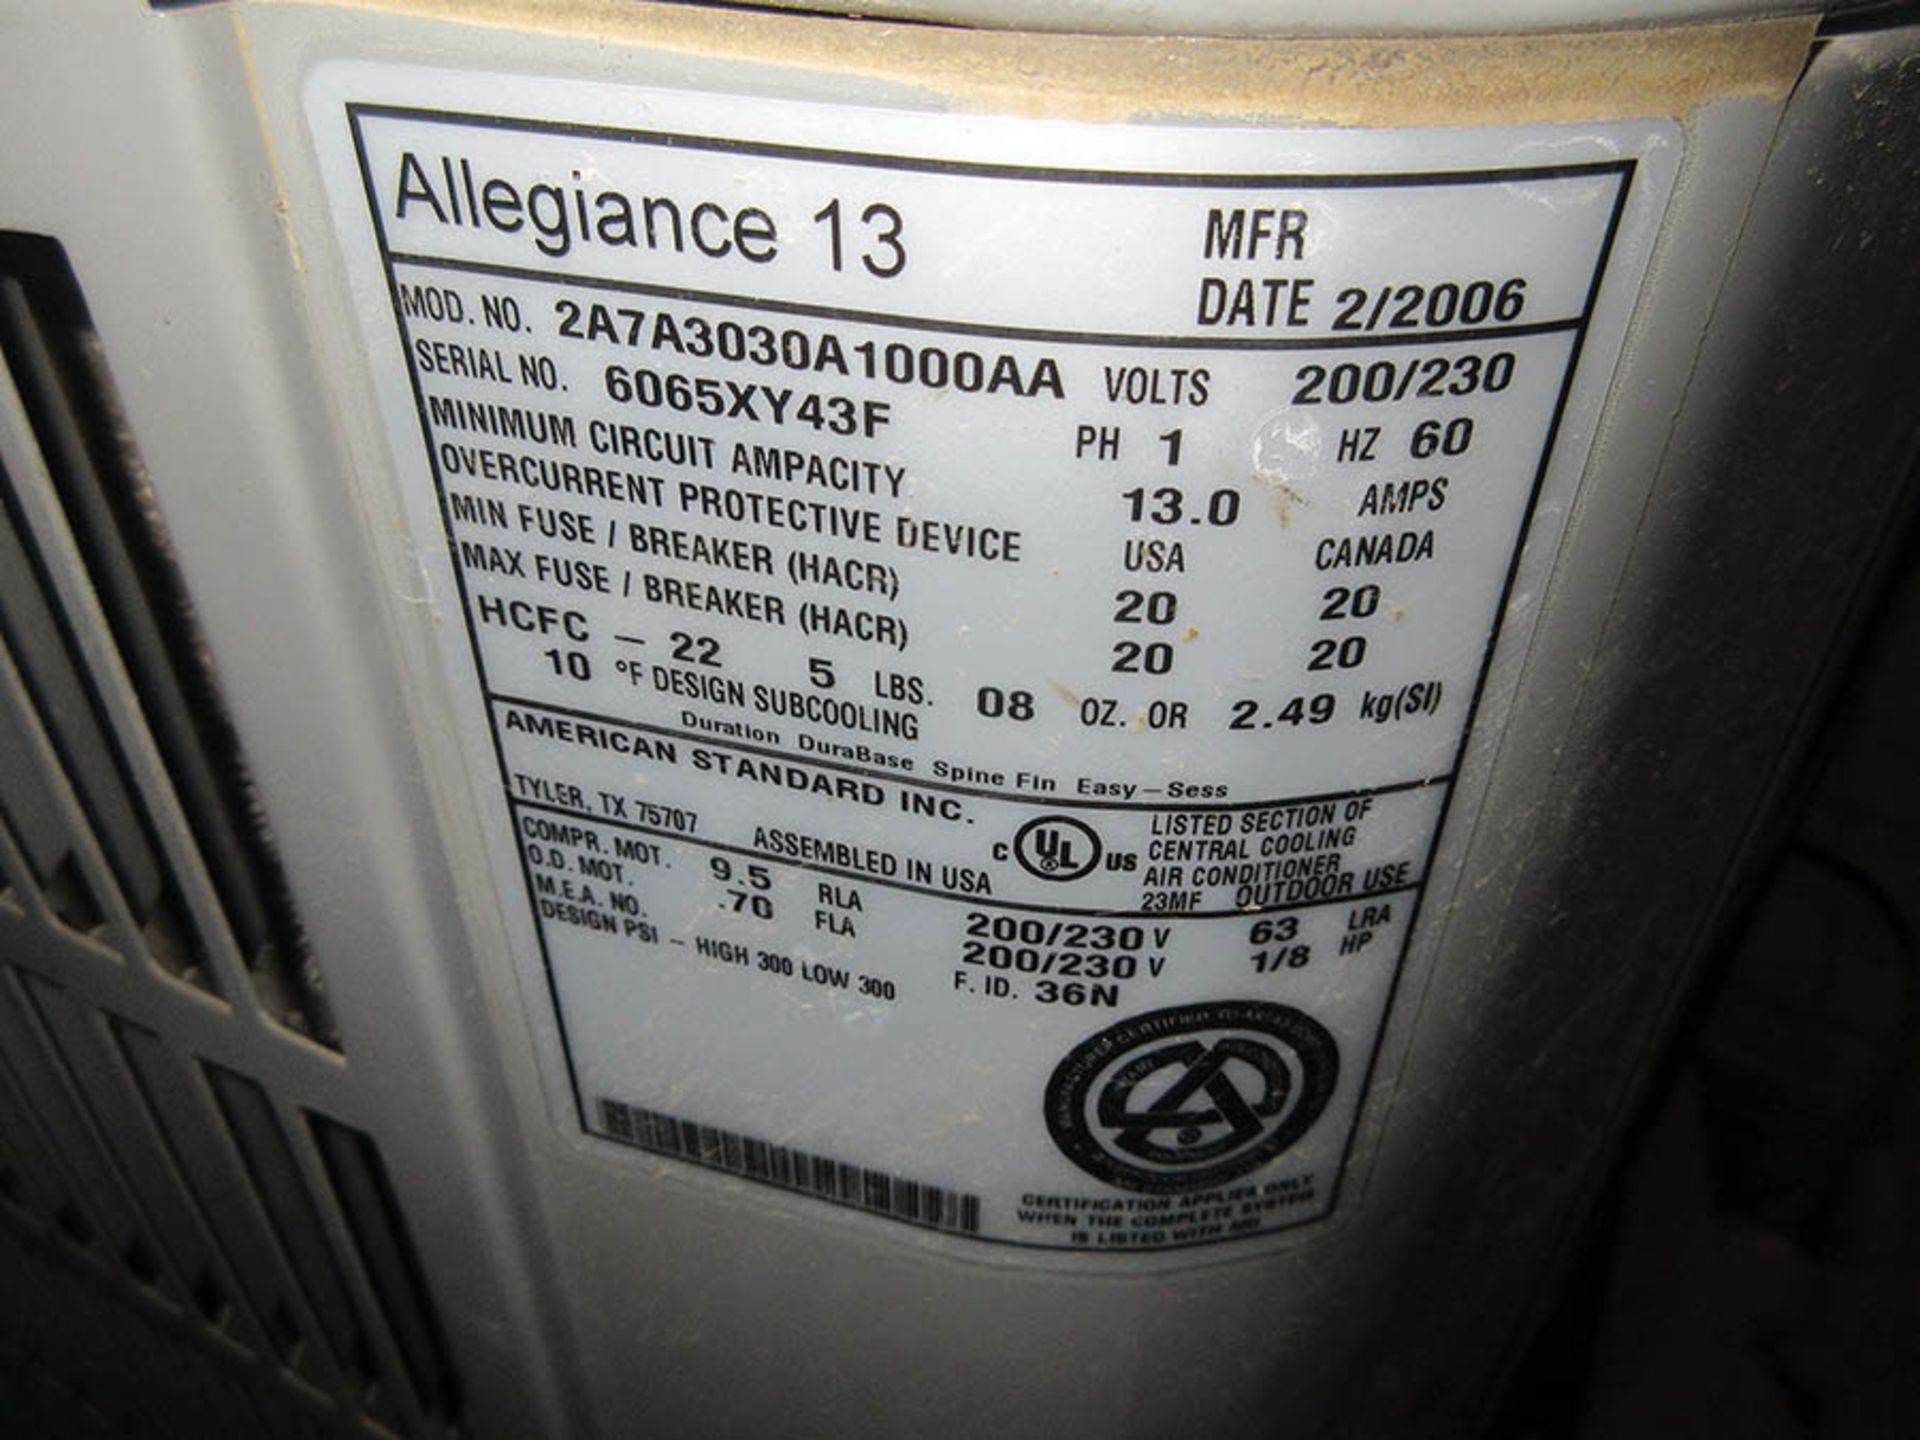 2006 AMERICAN STANDARD ALLEGIANCE 13 CENTRAL AIR CONDITIONER, 200-230/60/ SINGLE PHASE - Image 3 of 3